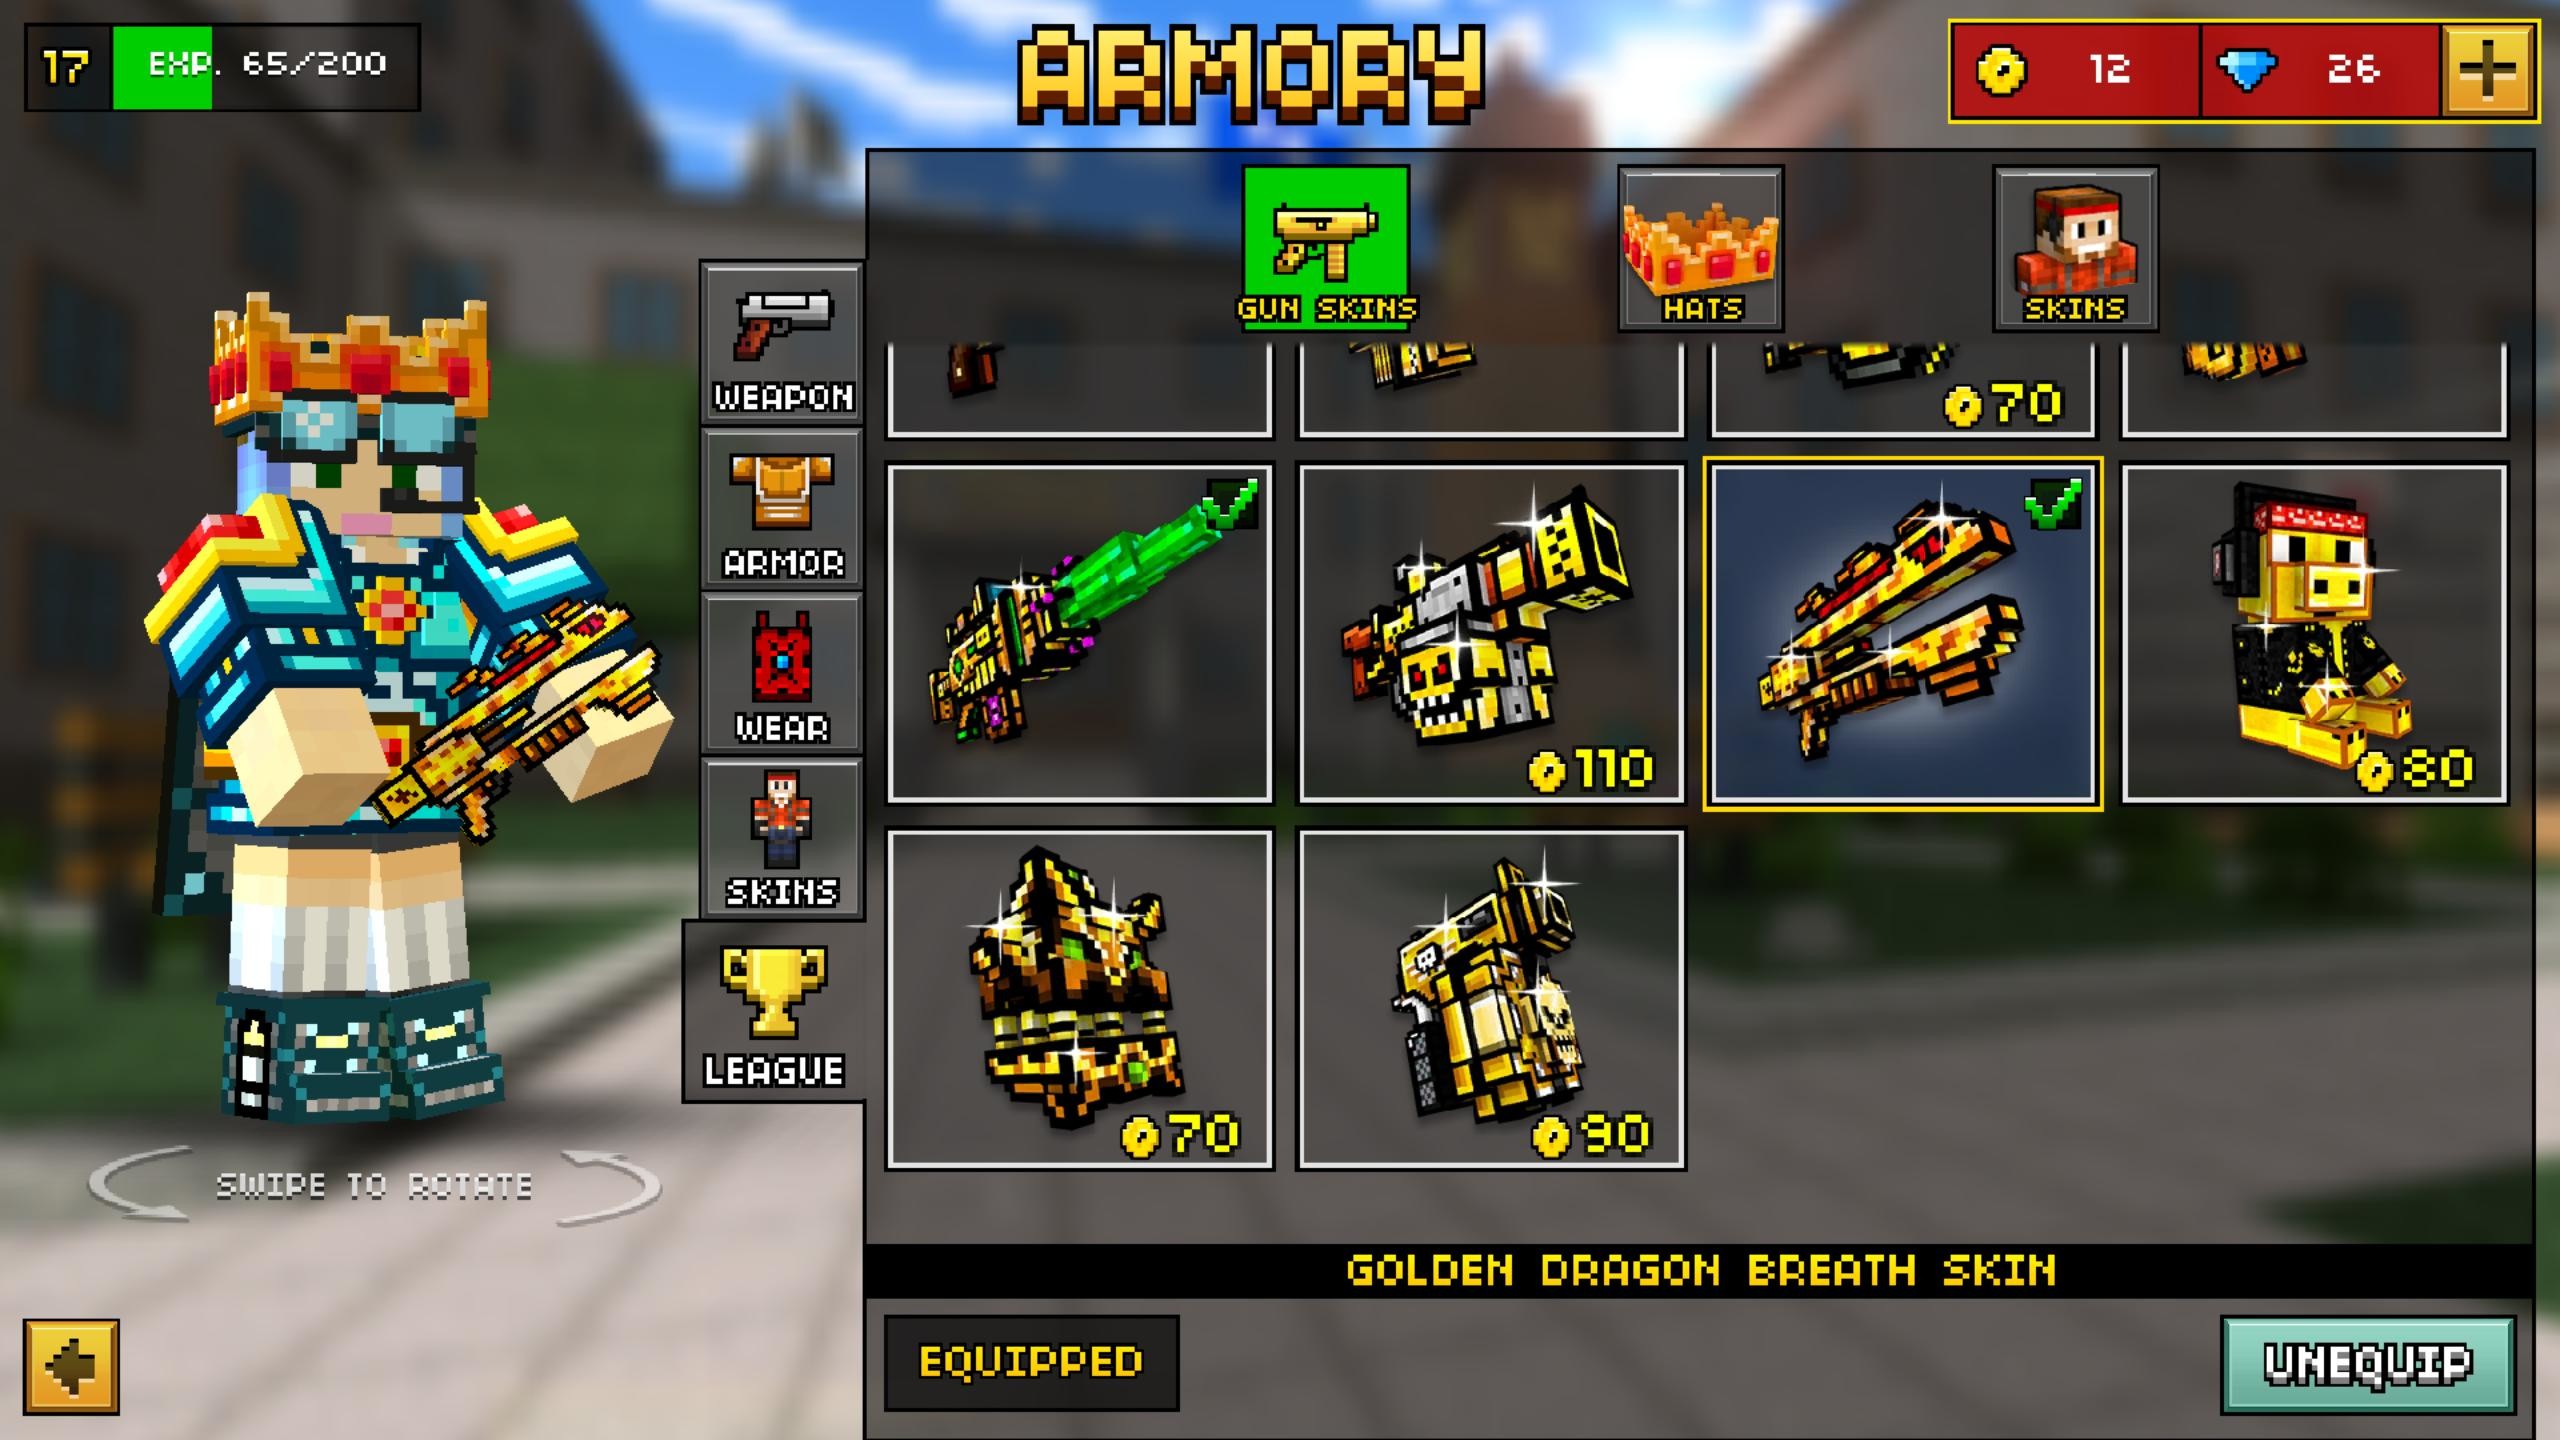 2560x1440 So I just wasted money on a golden Dragon Breath skin... | Pixel Gun 3D  Forums